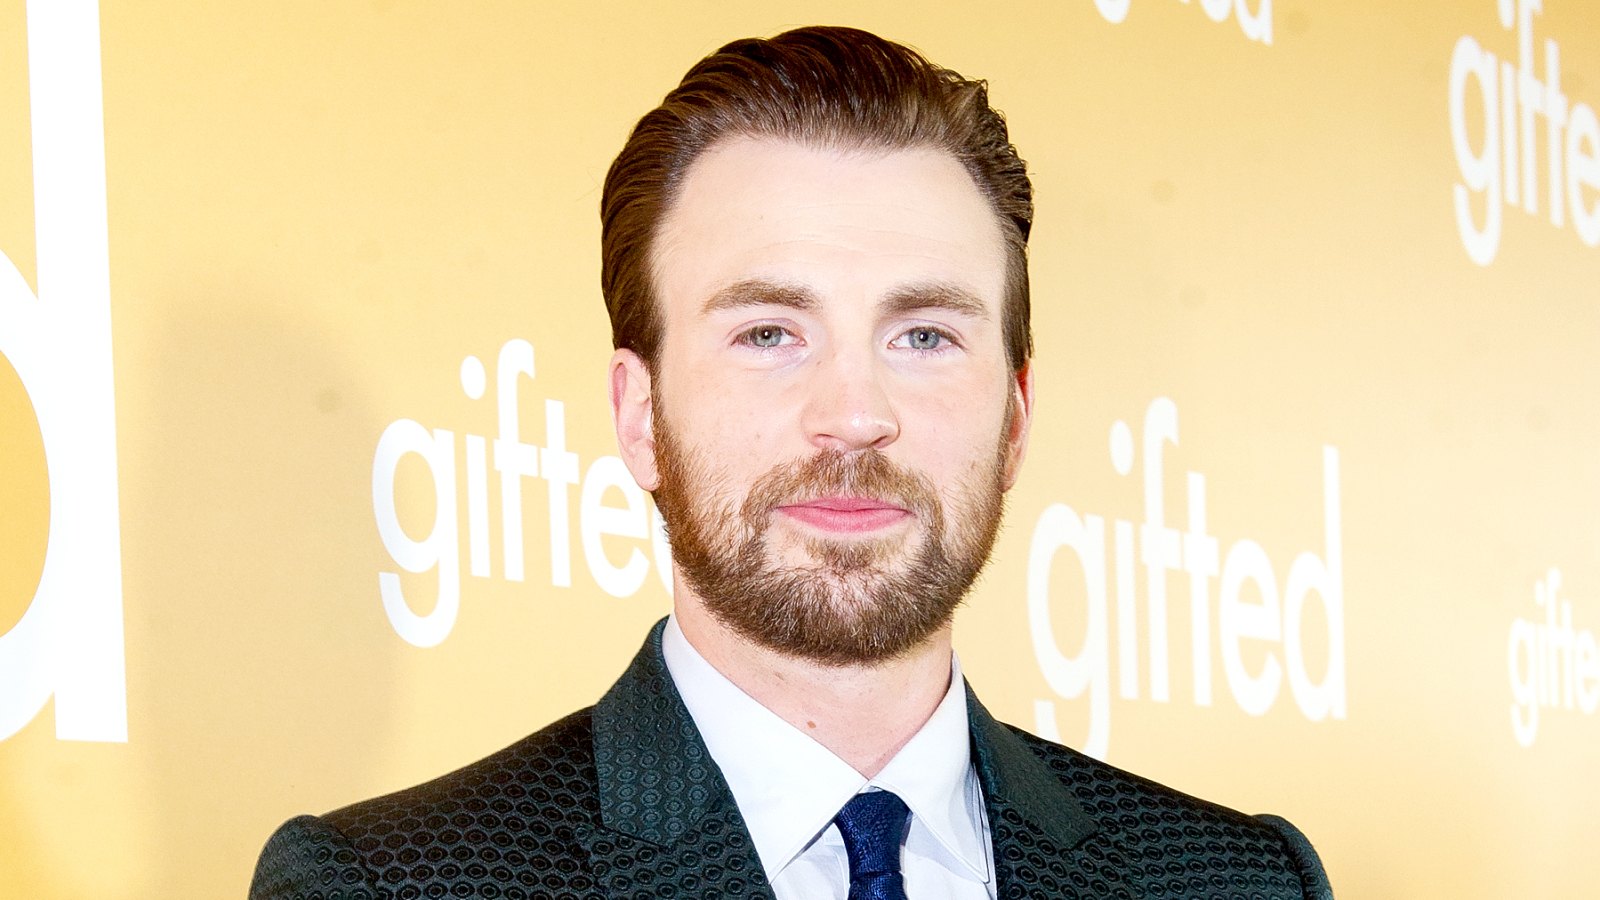 Chris Evans arrives at the premiere of Fox Searchlight Pictures' 'Gifted' at Pacific Theaters at the Grove on April 4, 2017 in Los Angeles, California.